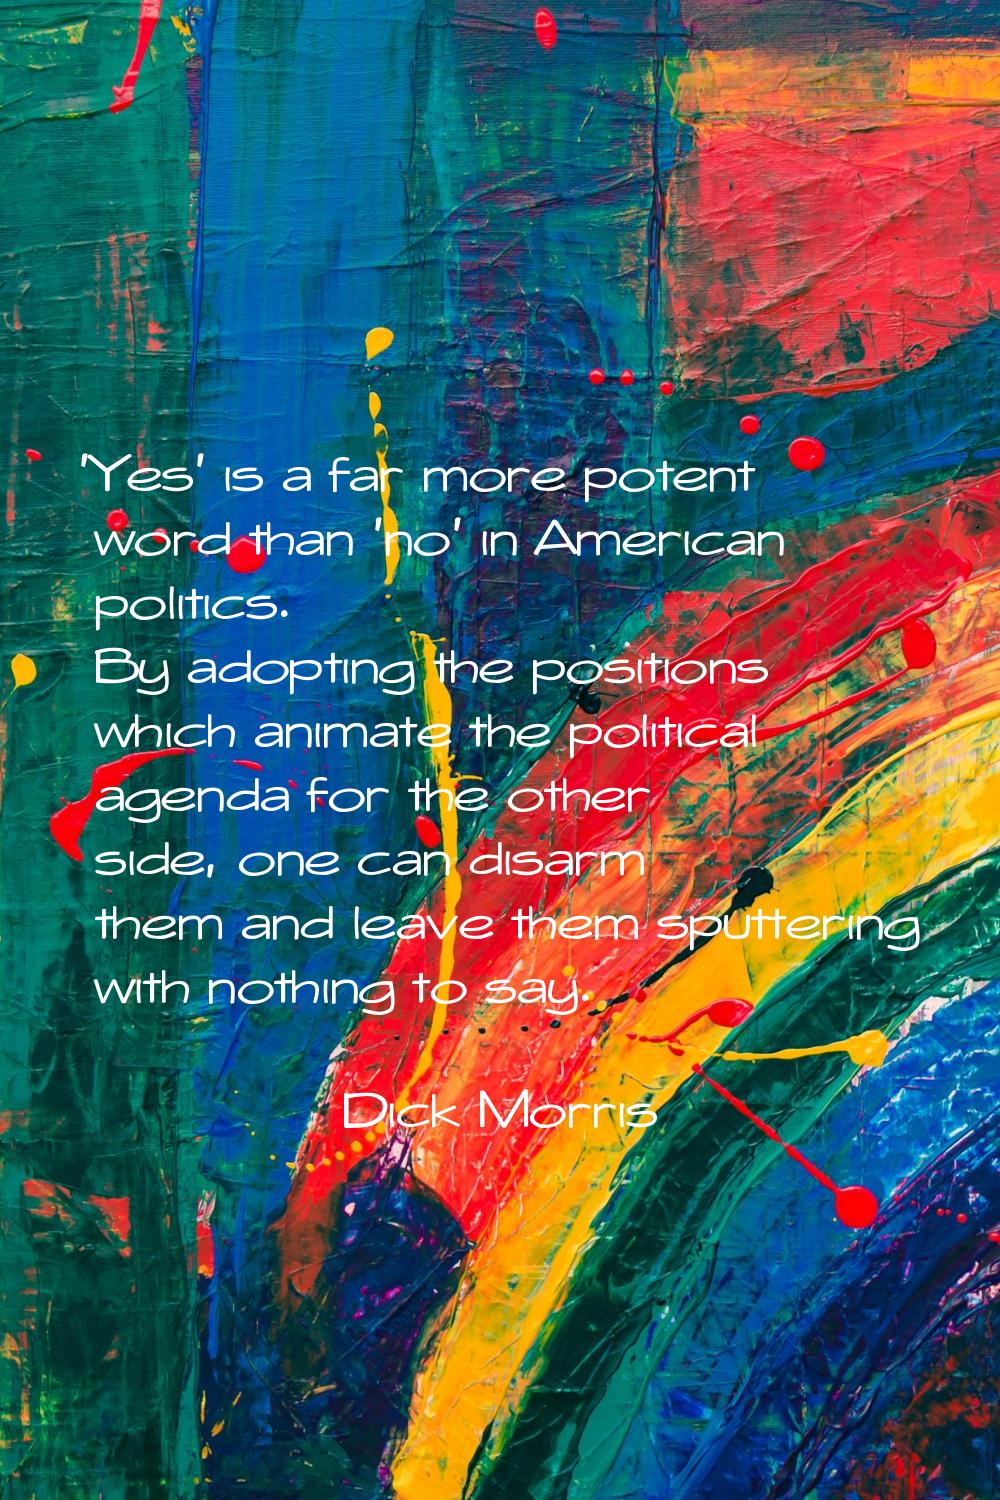 'Yes' is a far more potent word than 'no' in American politics. By adopting the positions which ani